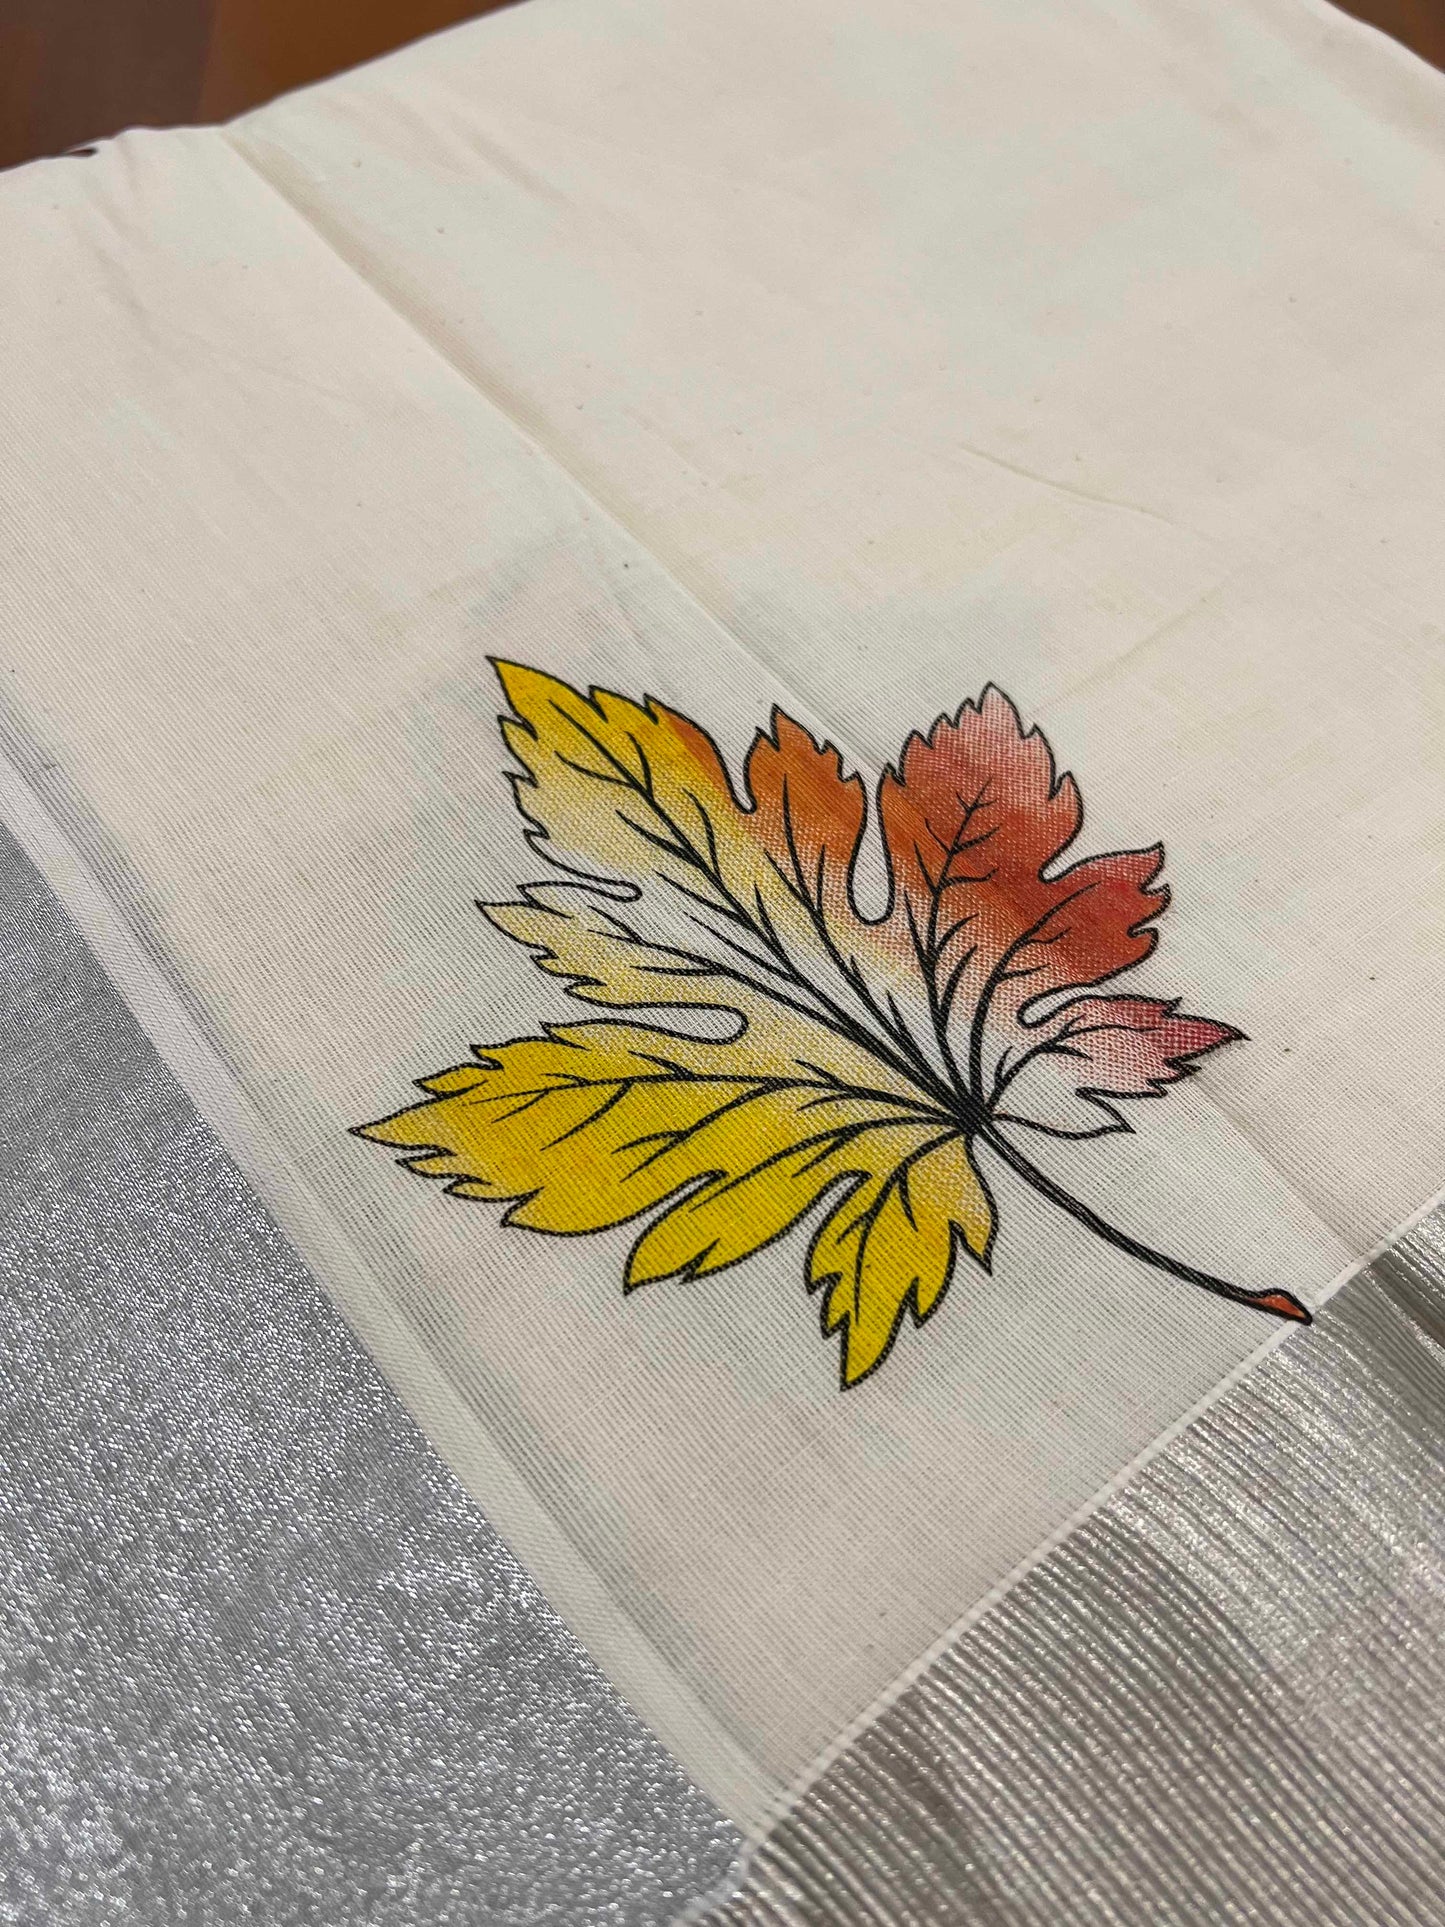 Off White Pure Cotton Kerala Saree with Leaf Mural Prints and Silver Kasavu Border